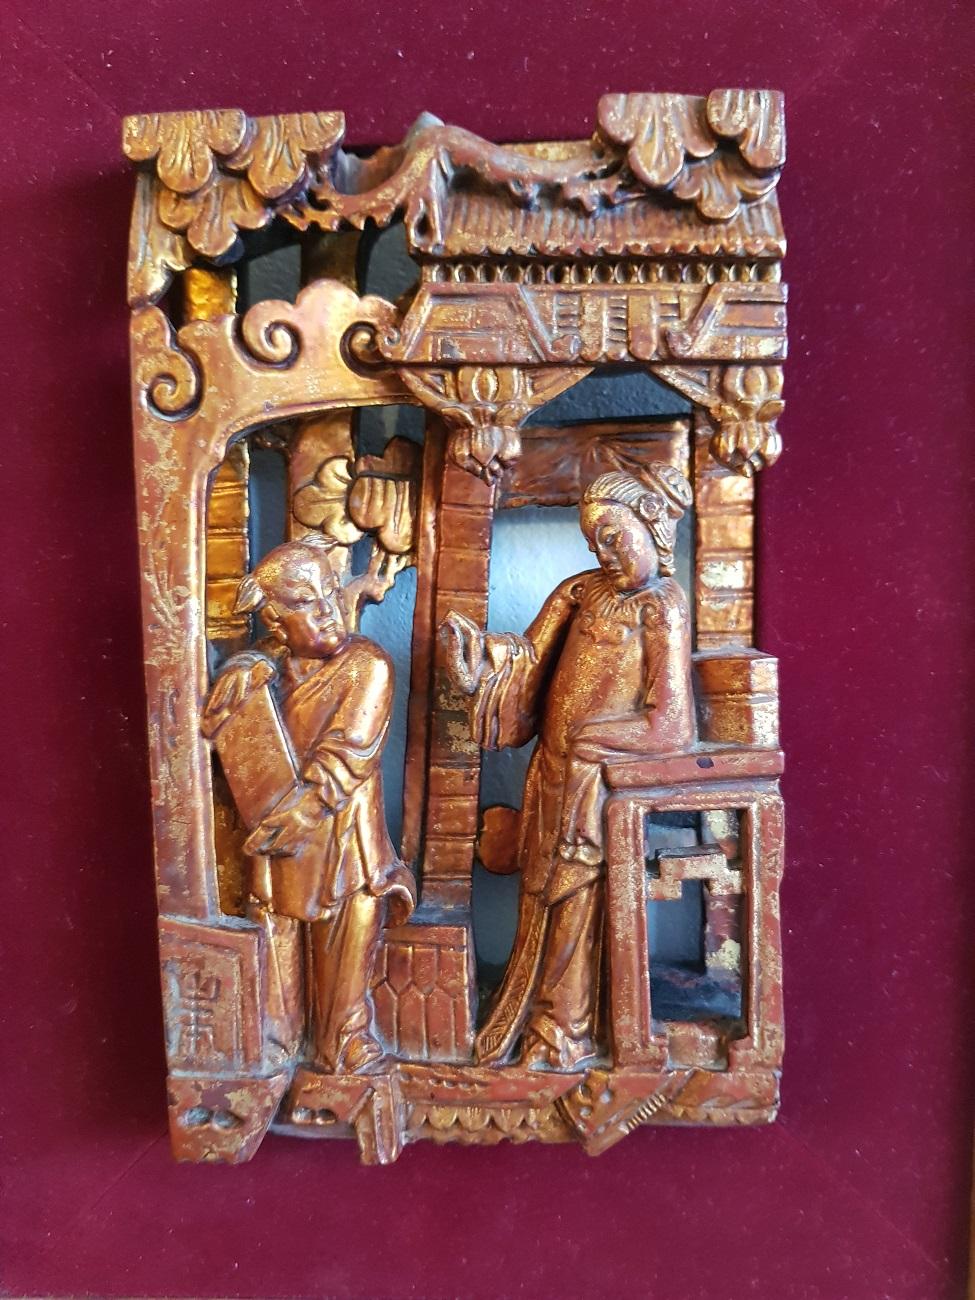 Late 19th century Chinese gilded carved wooden panel depicting 2 people standing in a building, it is framed on red velvet with a gilt faux bamboo frame.

The measurements are incl. frame,
Depth 4.5 cm/ 1.7 inch.
Width 24 cm/ 9.4 inch.
Height